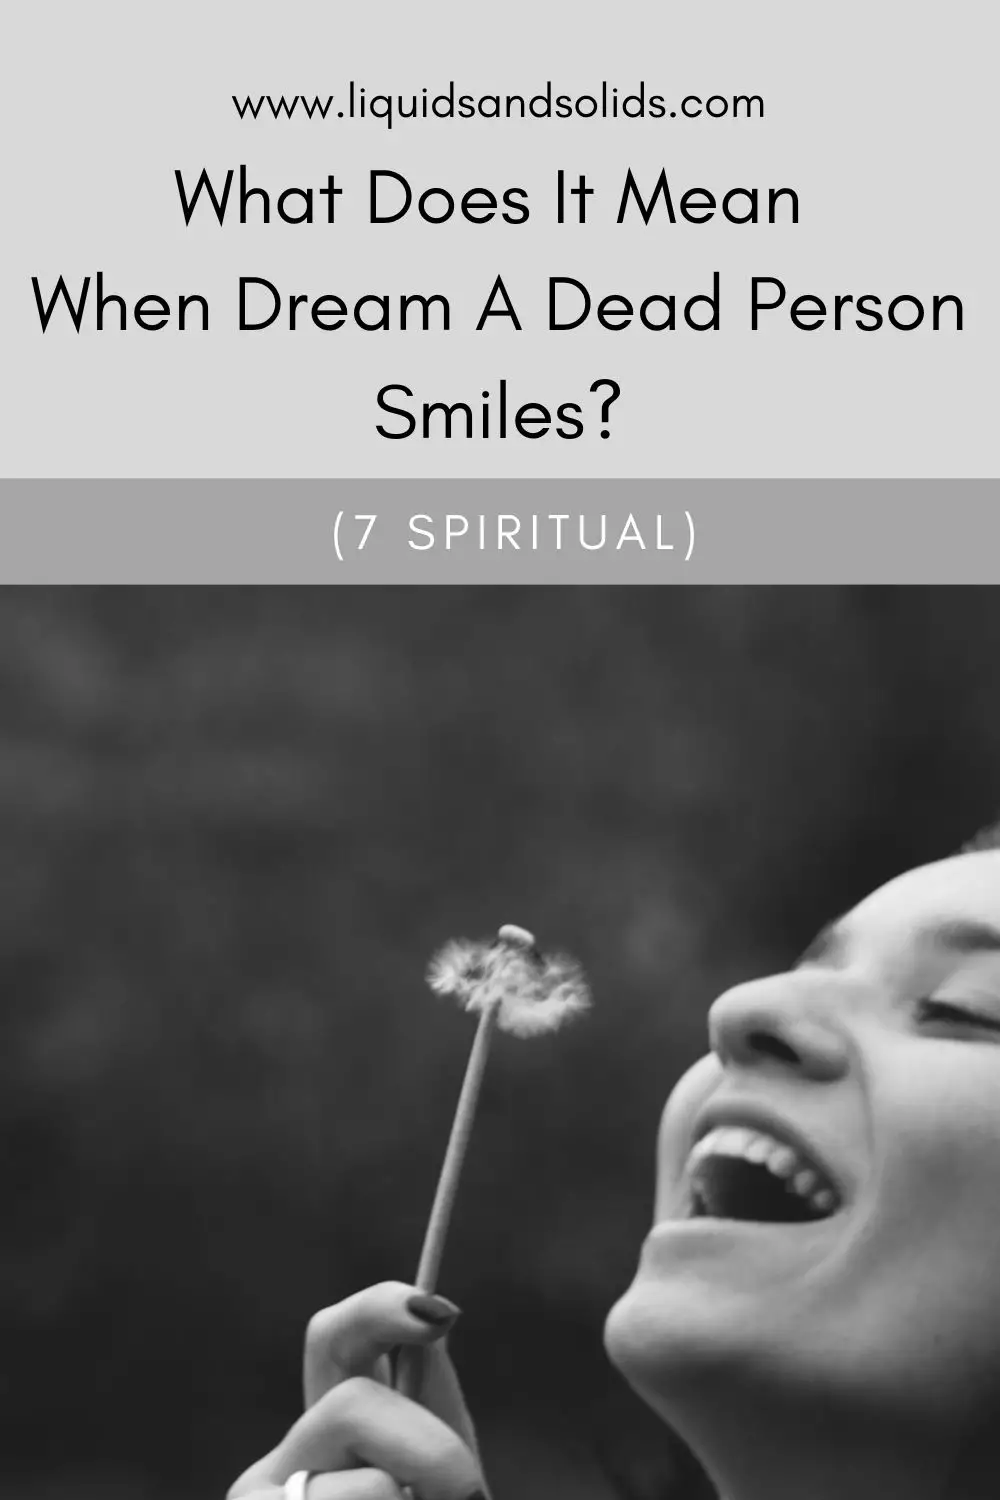 What Does It Mean To Dream Of A Dead Person Smiling?